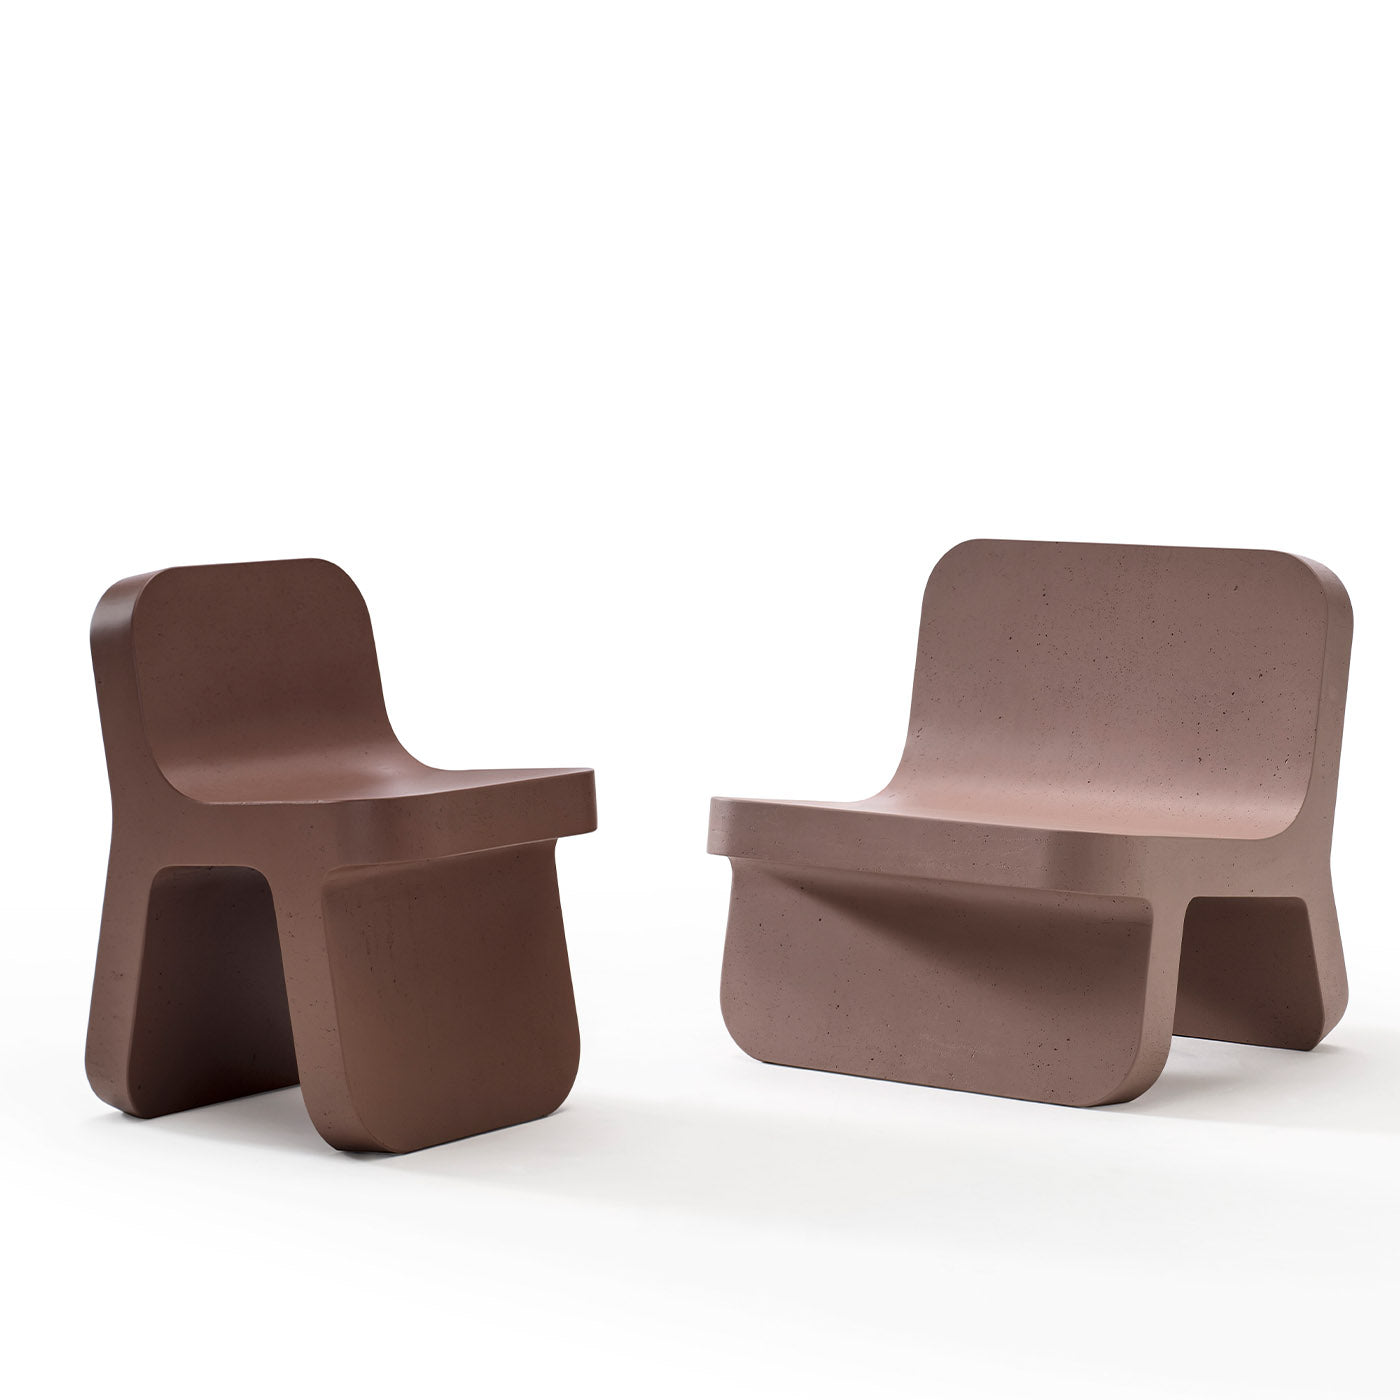 Torcello Chair by Defne Koz and Marco Susani - Alternative view 2